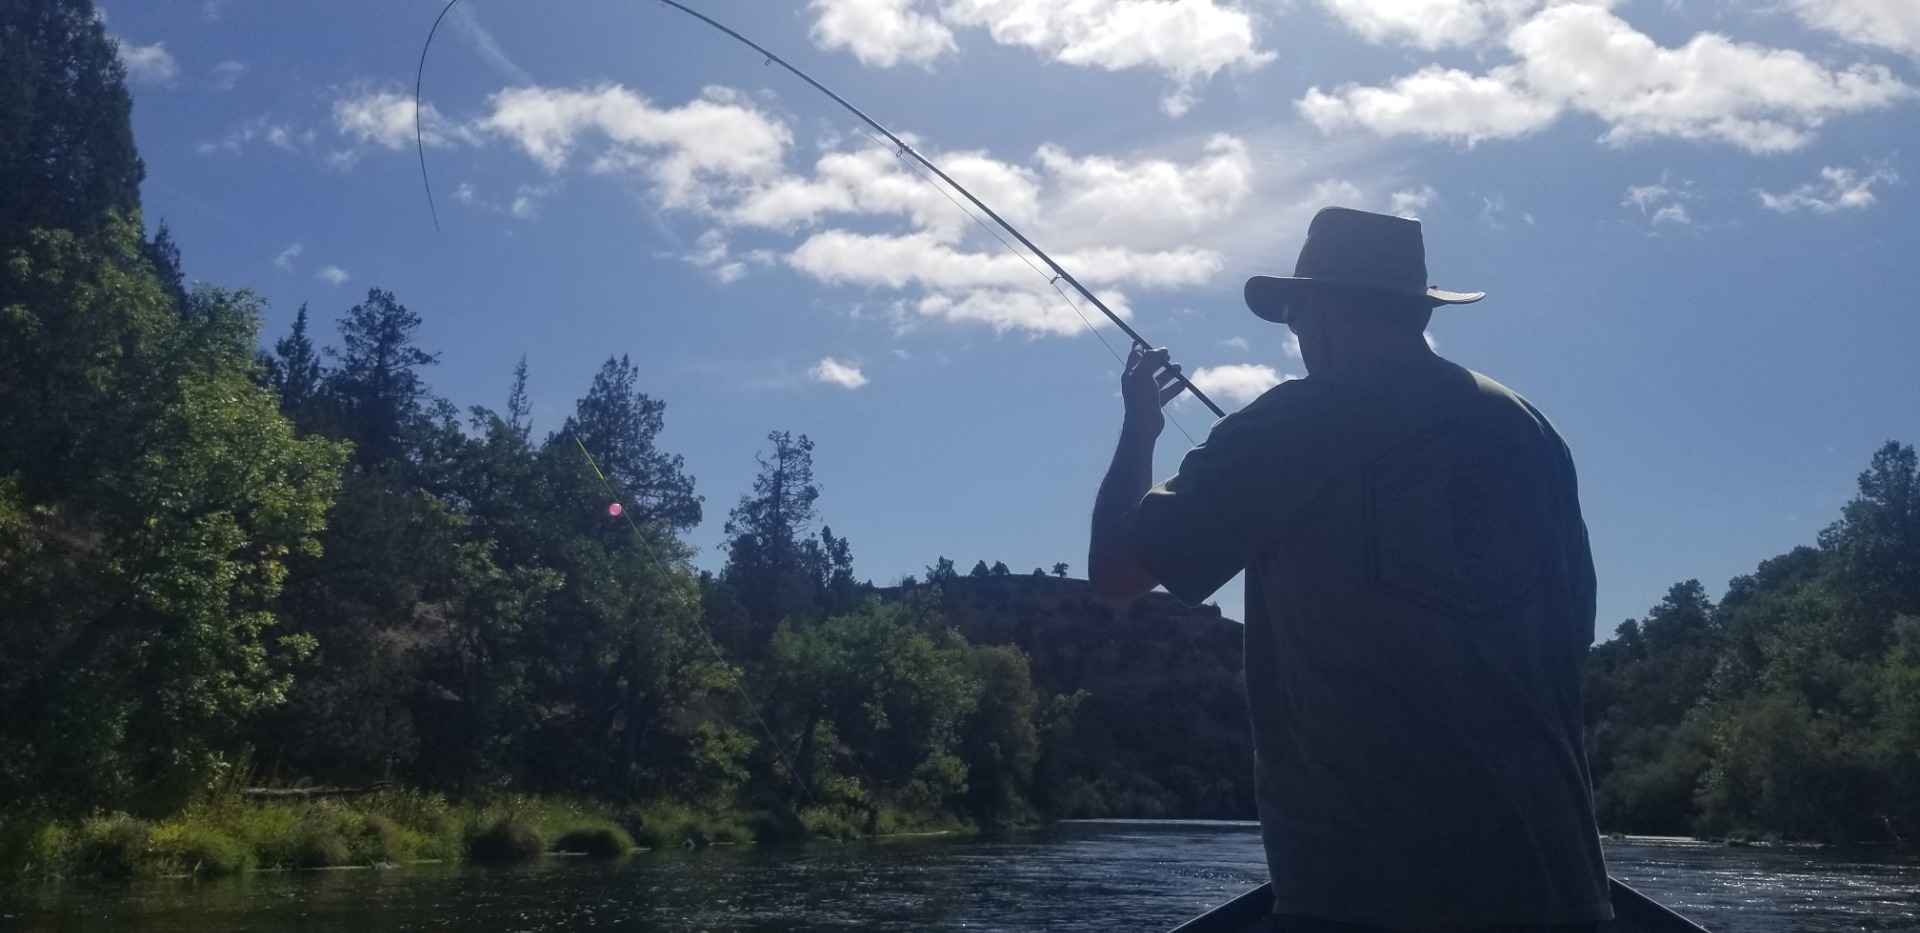 Klamath Steely Trout on fire, Salmon coming